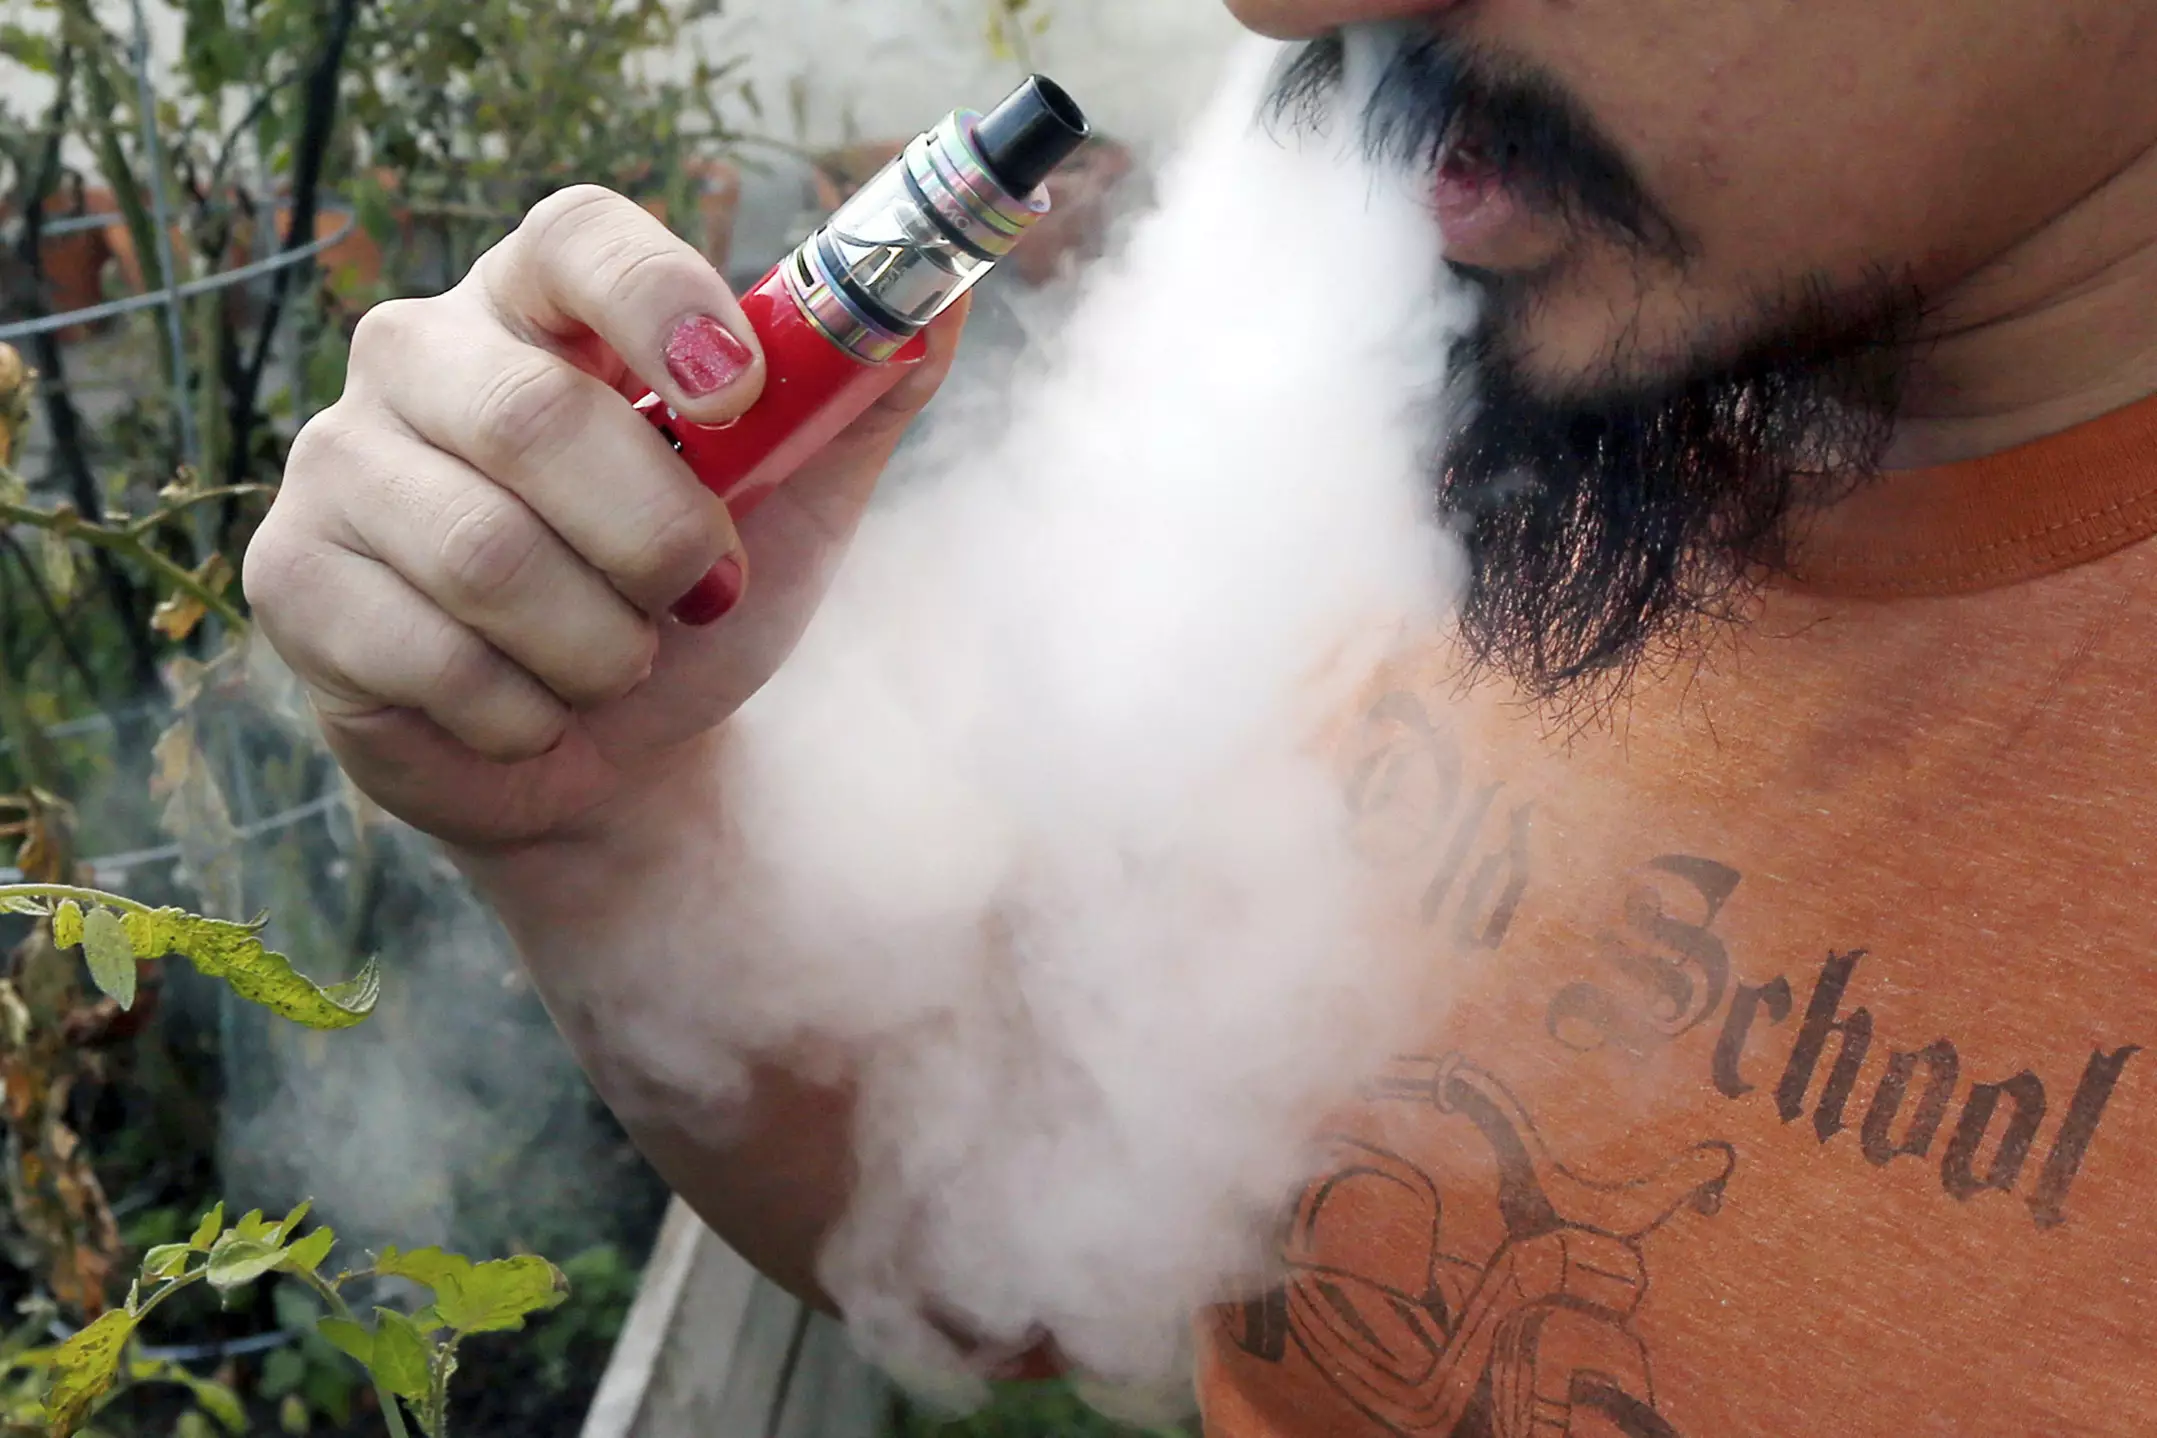 2,051 people have suffered from suspected vaping-related injuries in the USA.